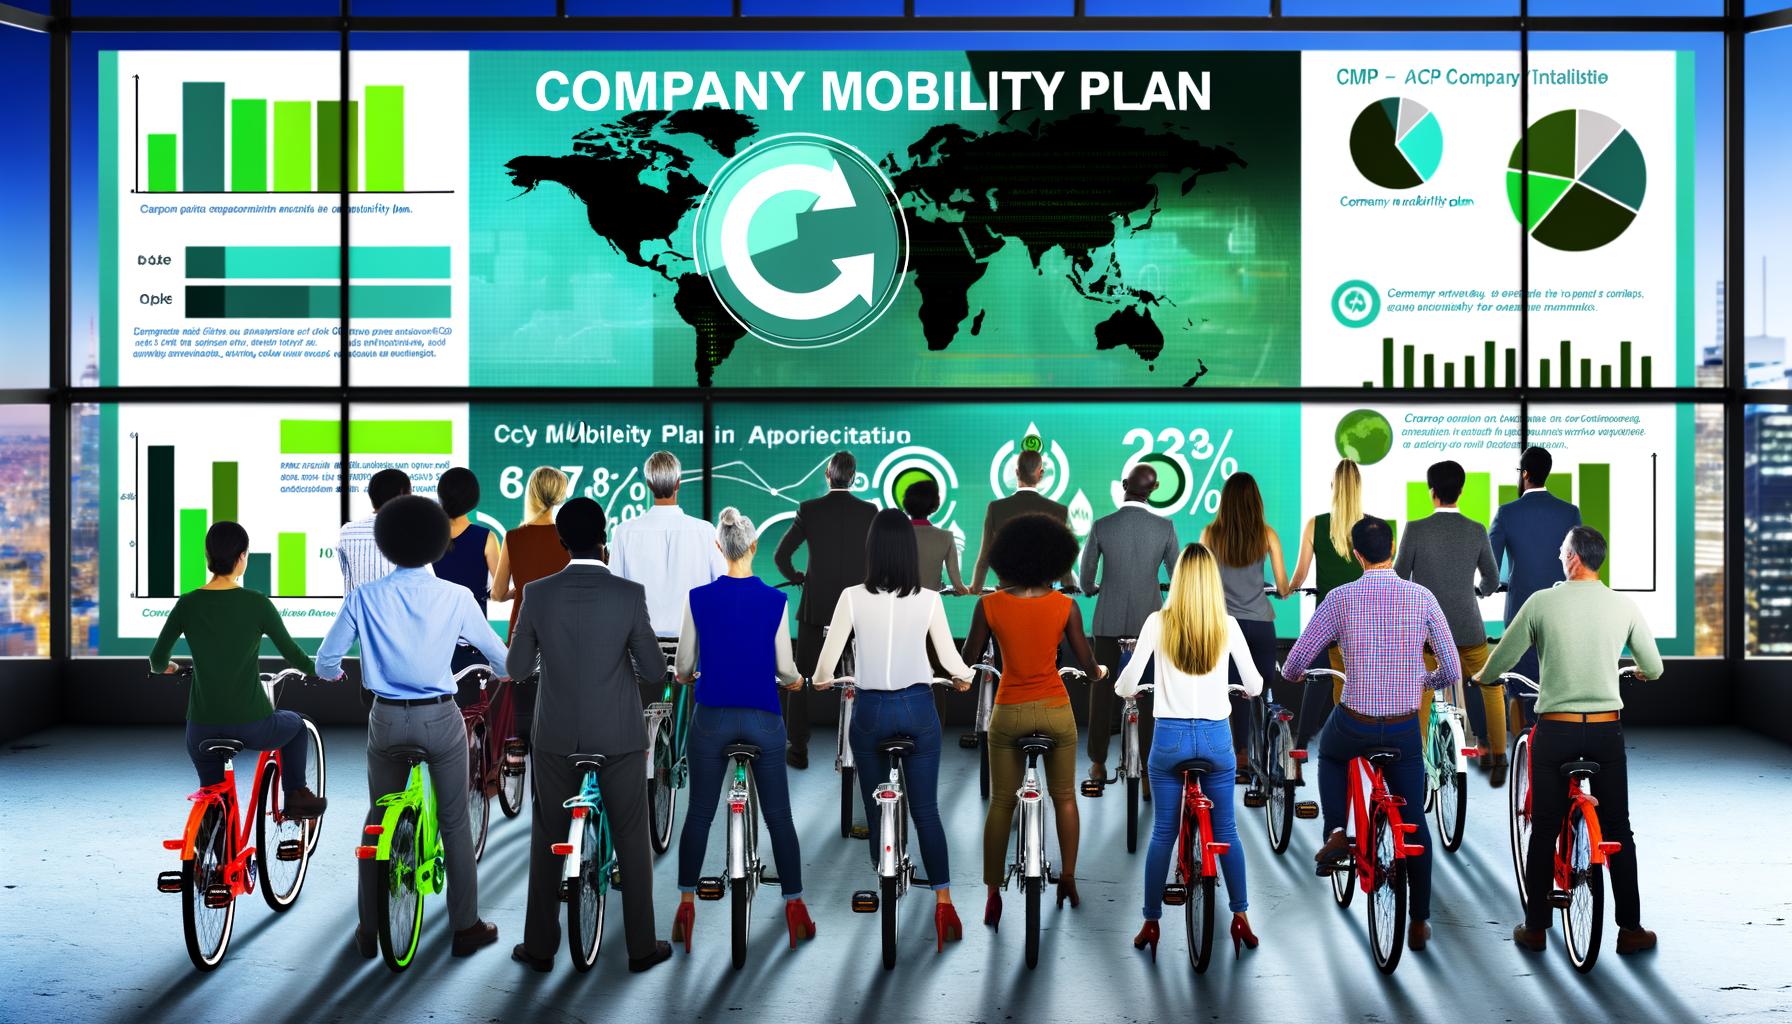 An article discussing the implementation of a Company Mobility Plan CMP by bikes for sustainable and efficient transportation options for employees